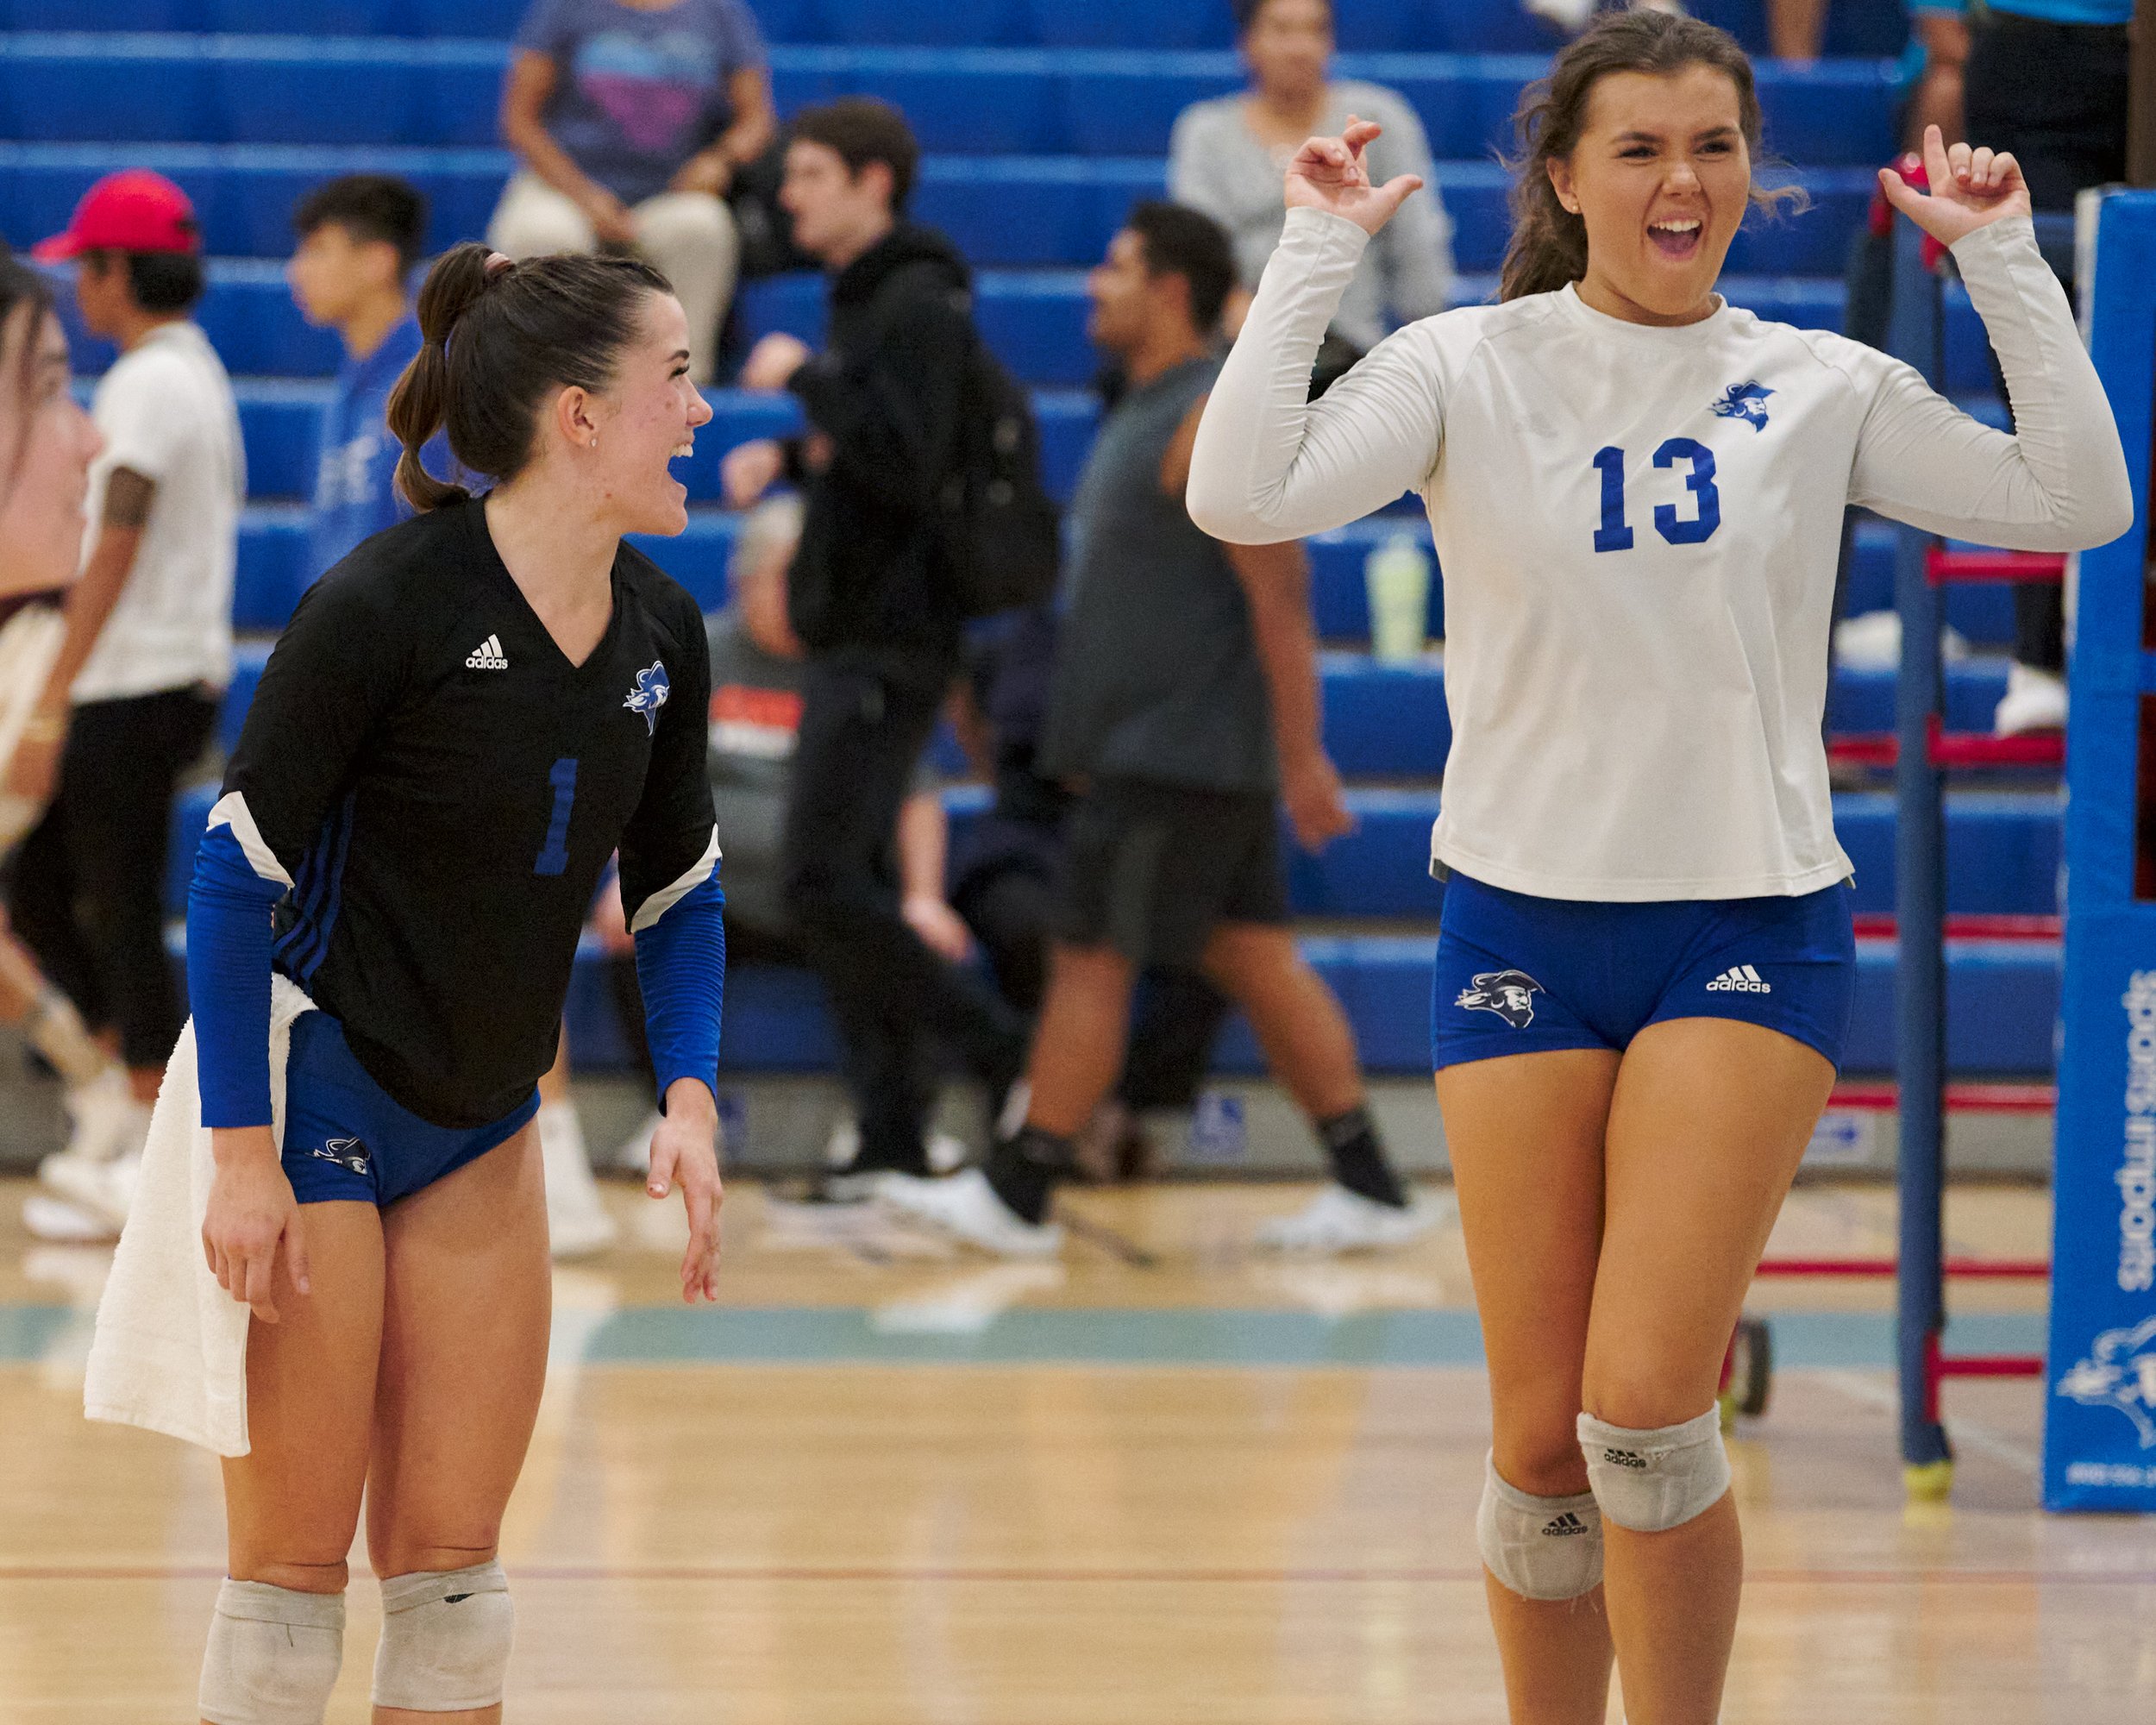  Santa Monica College Corsairs' Mackenzie Wolff (right) and Halle Anderson (left) during the women's volleyball match against the Citrus College Owls on Wednesday, Oct. 19, 2022, at Corsair Gym in Santa Monica, Calif. The Corsairs won 3-2. (Nicholas 